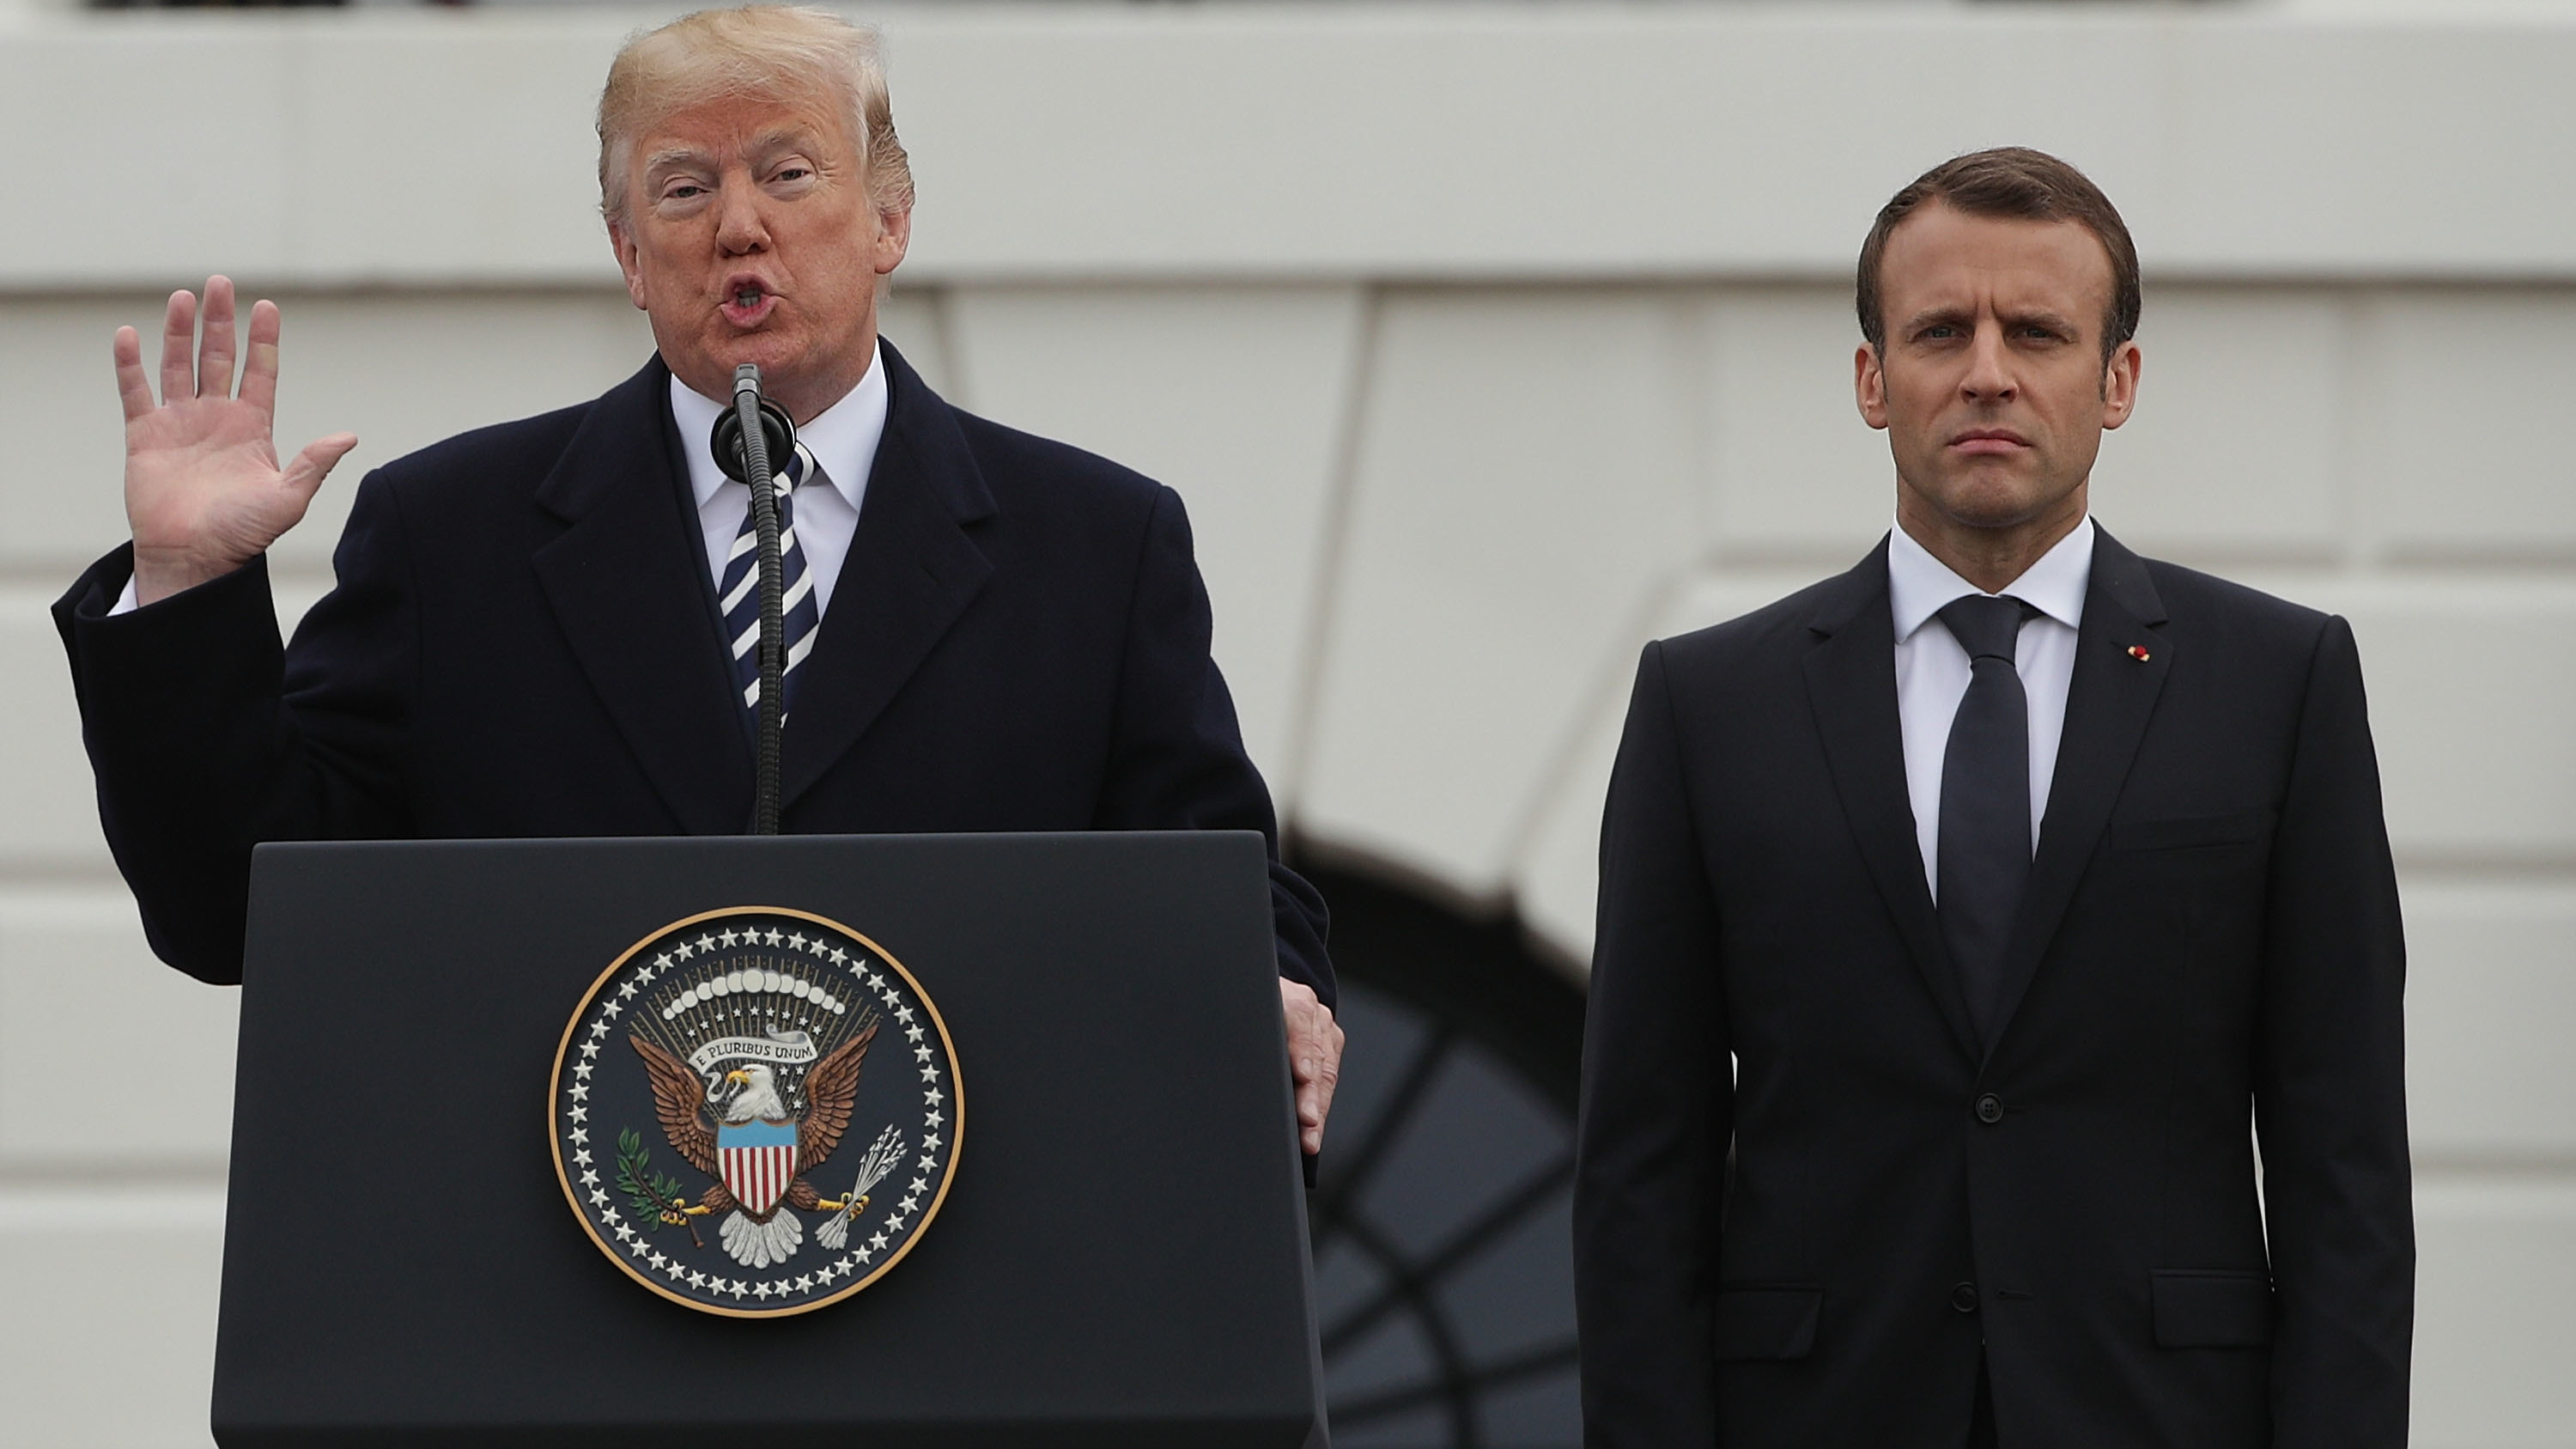 President Trump and French President Emmanuel Macron participate in a state arrival ceremony at the South Lawn of the White House on April 24.
